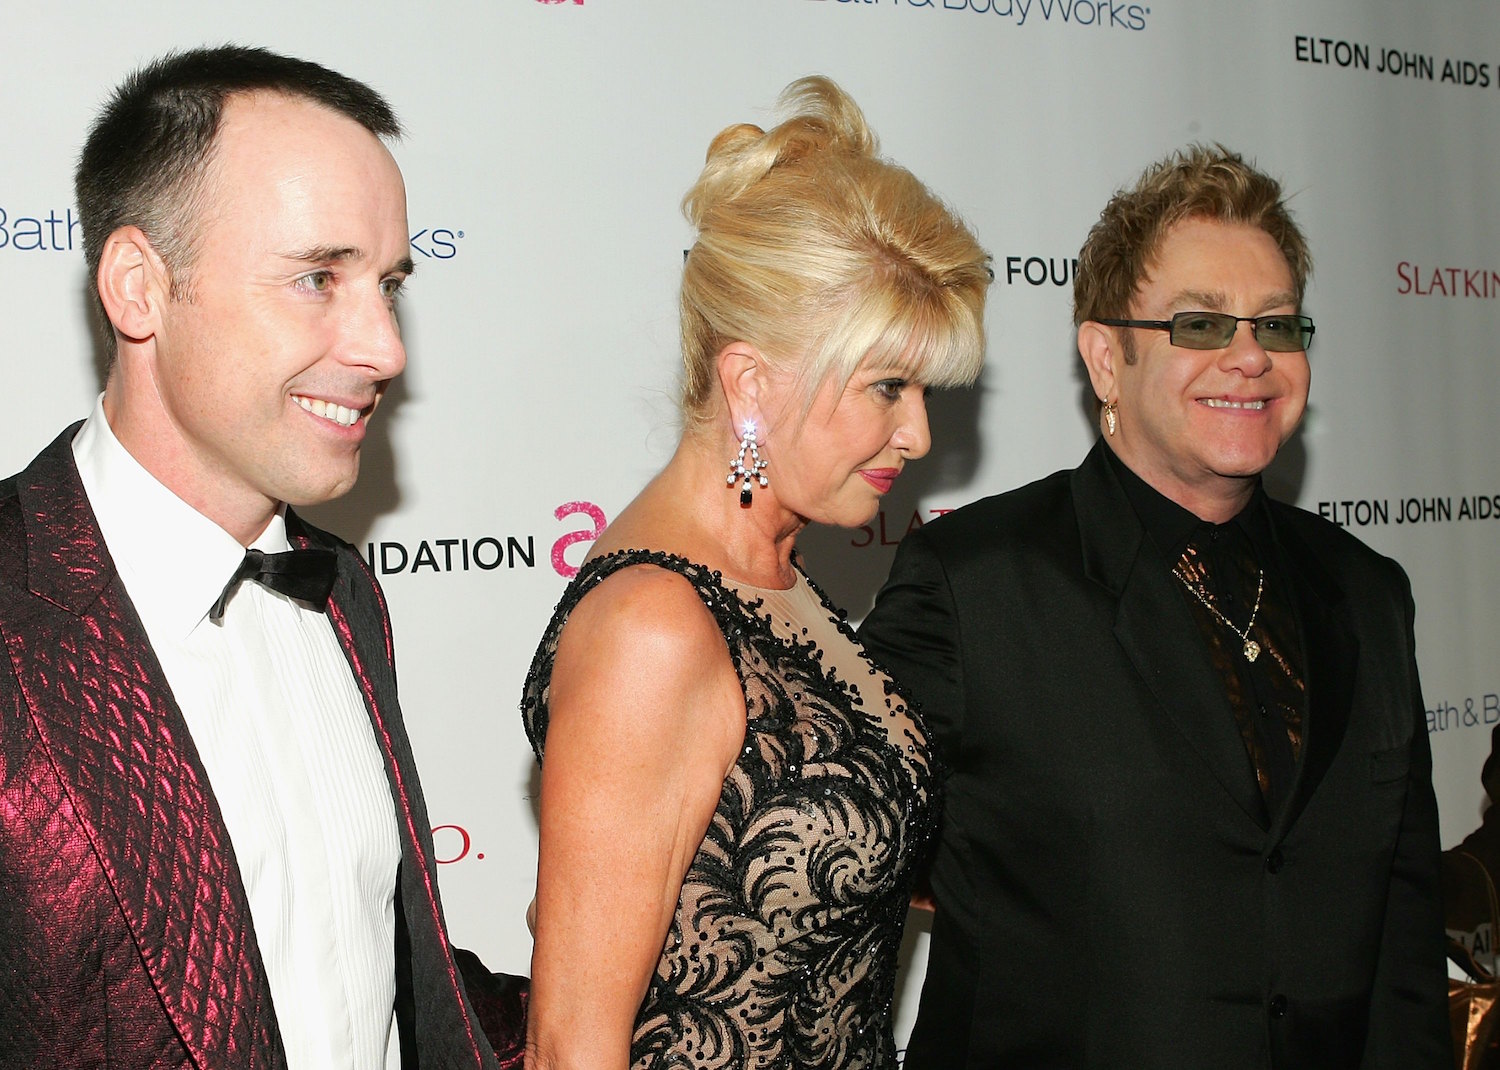 The Elton John AIDS Foundation's Fifth Annual Benefit "An Enduring Vision"